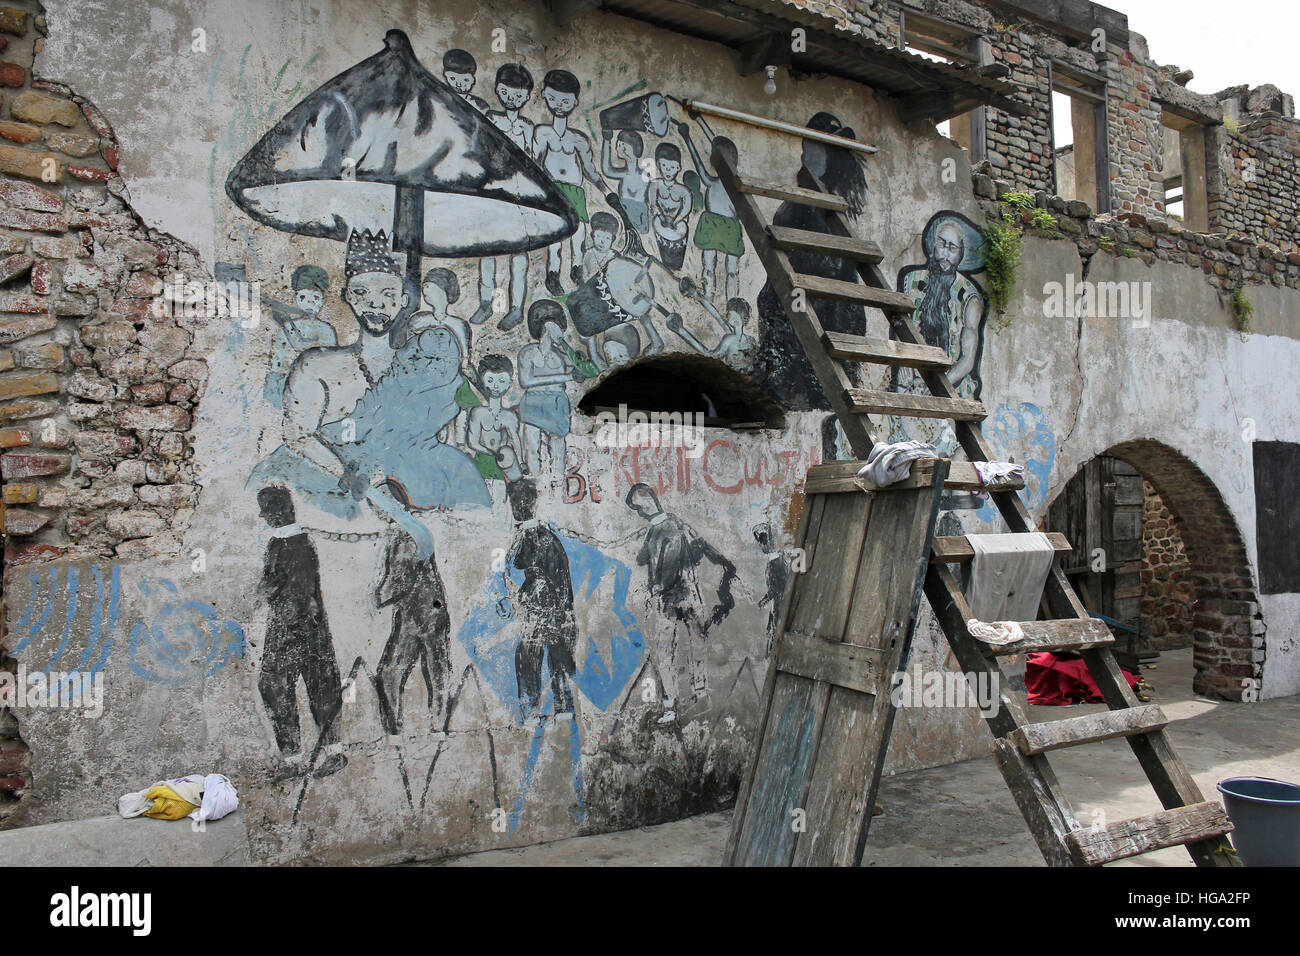 Dilapidated Colonial Building With Graffiti, Jamestown, Accra, Ghana Stock Photo